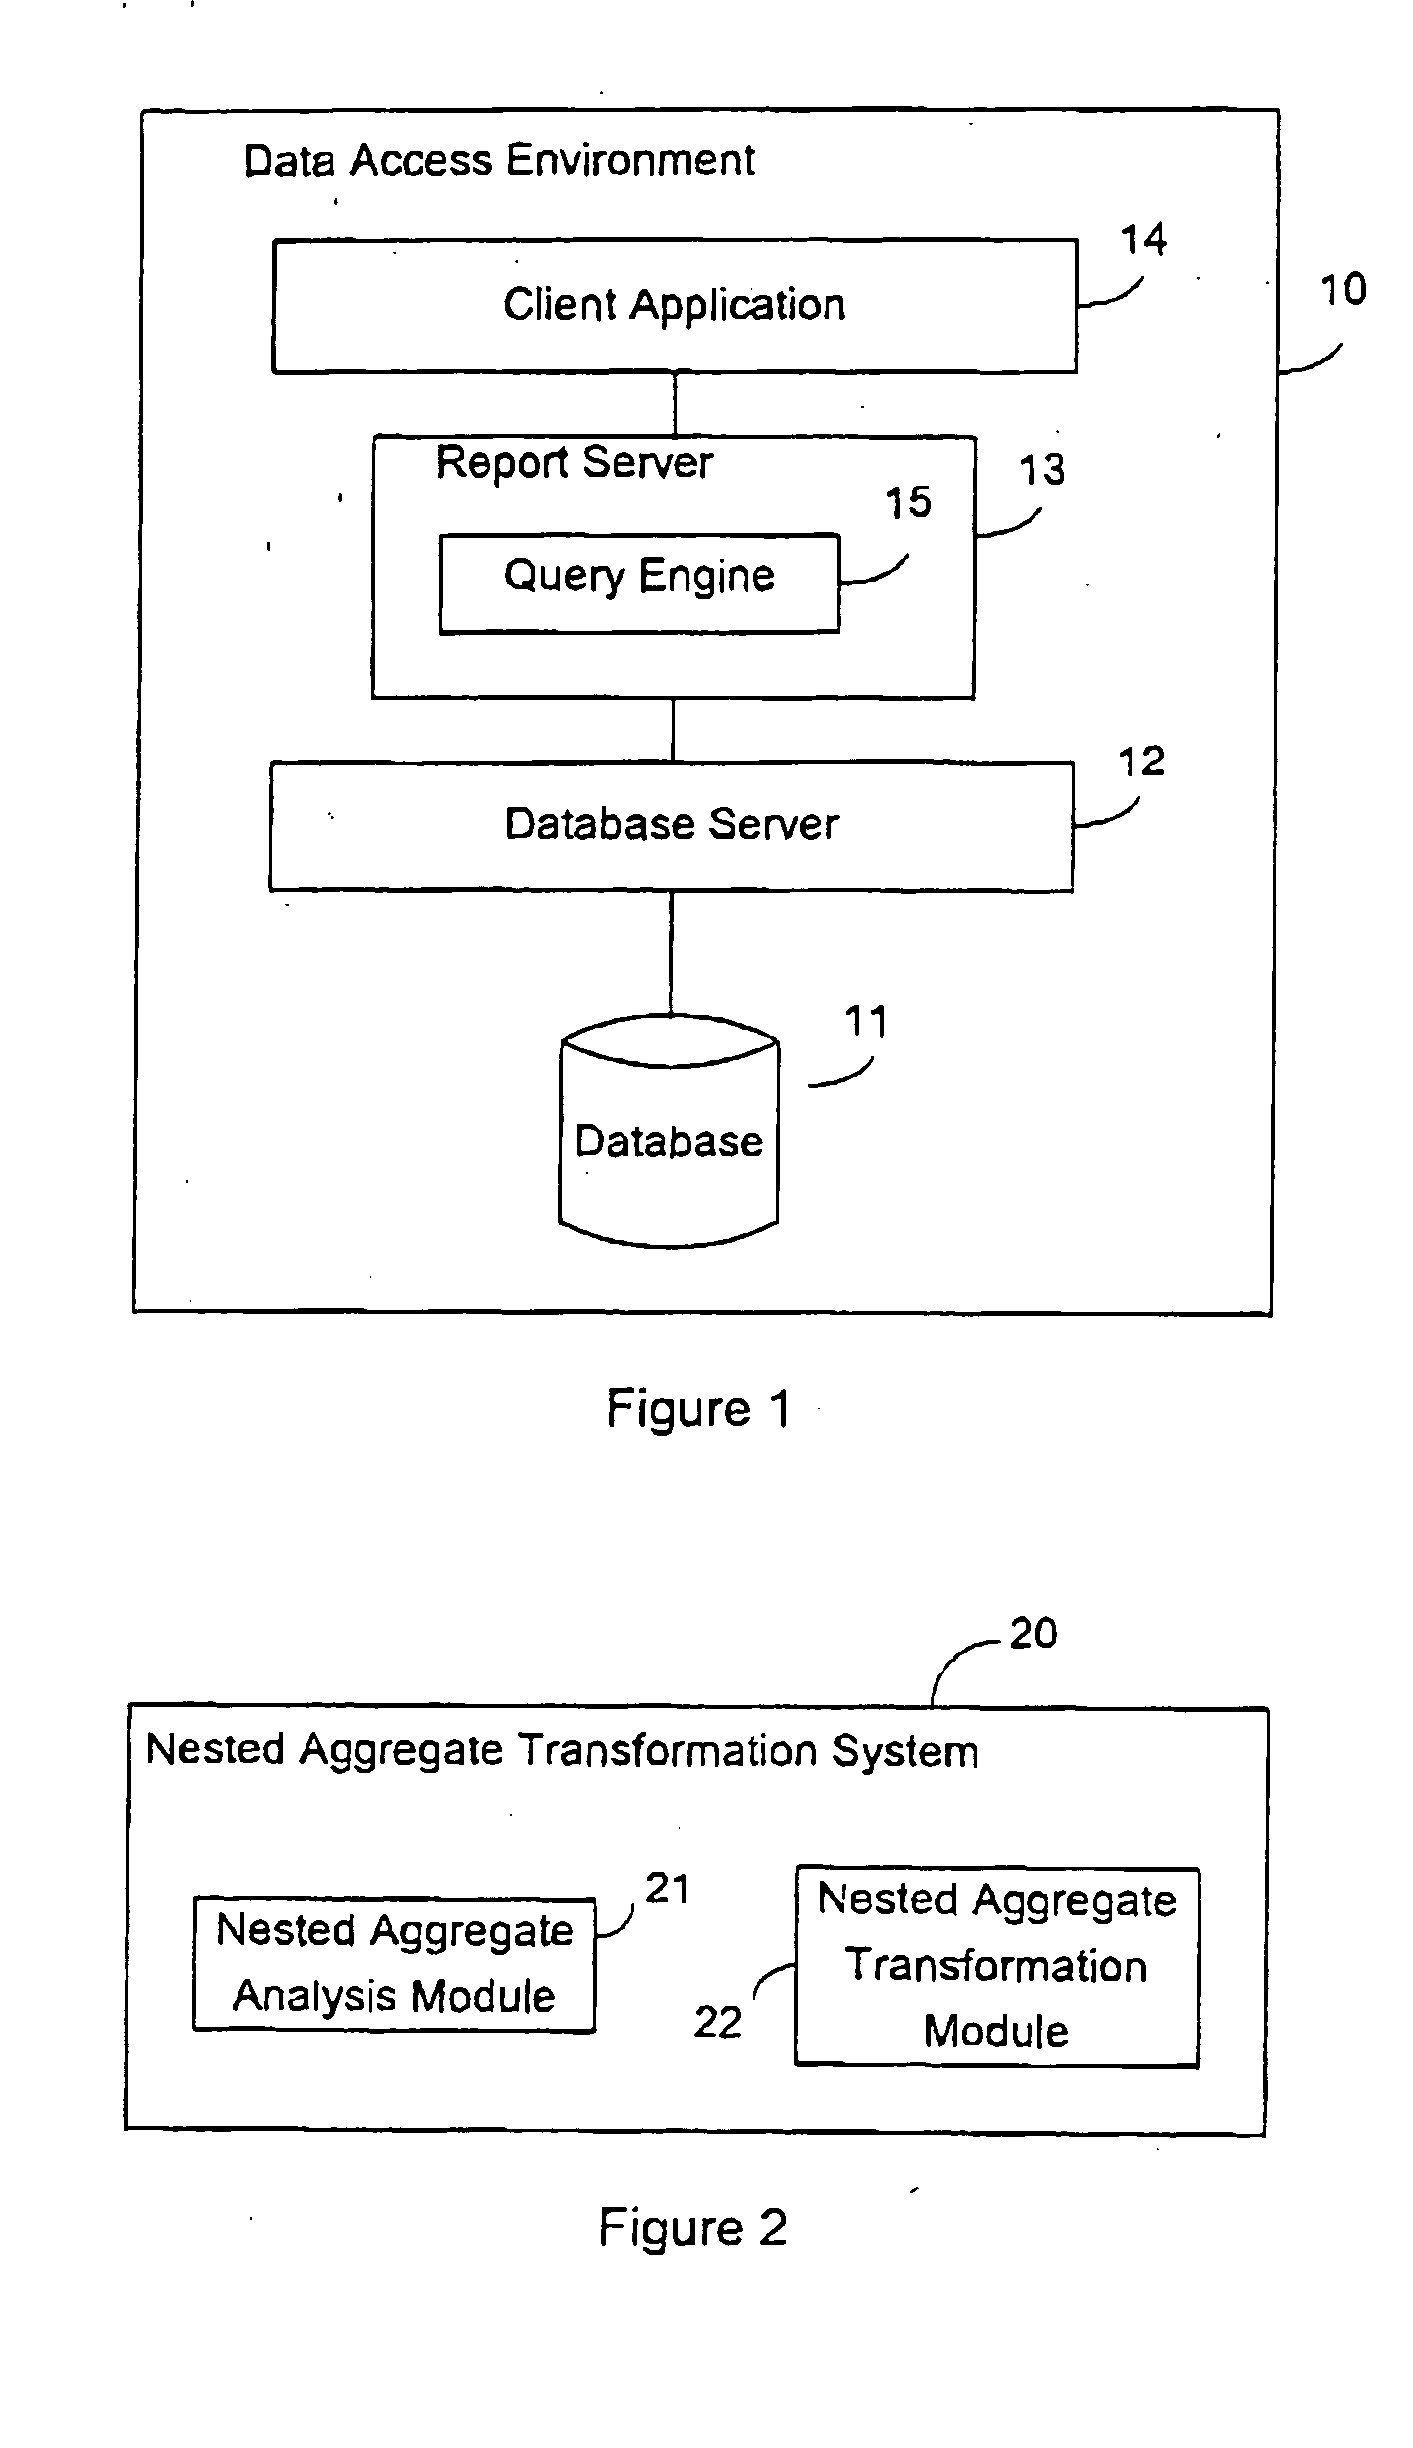 System and method of query transformation